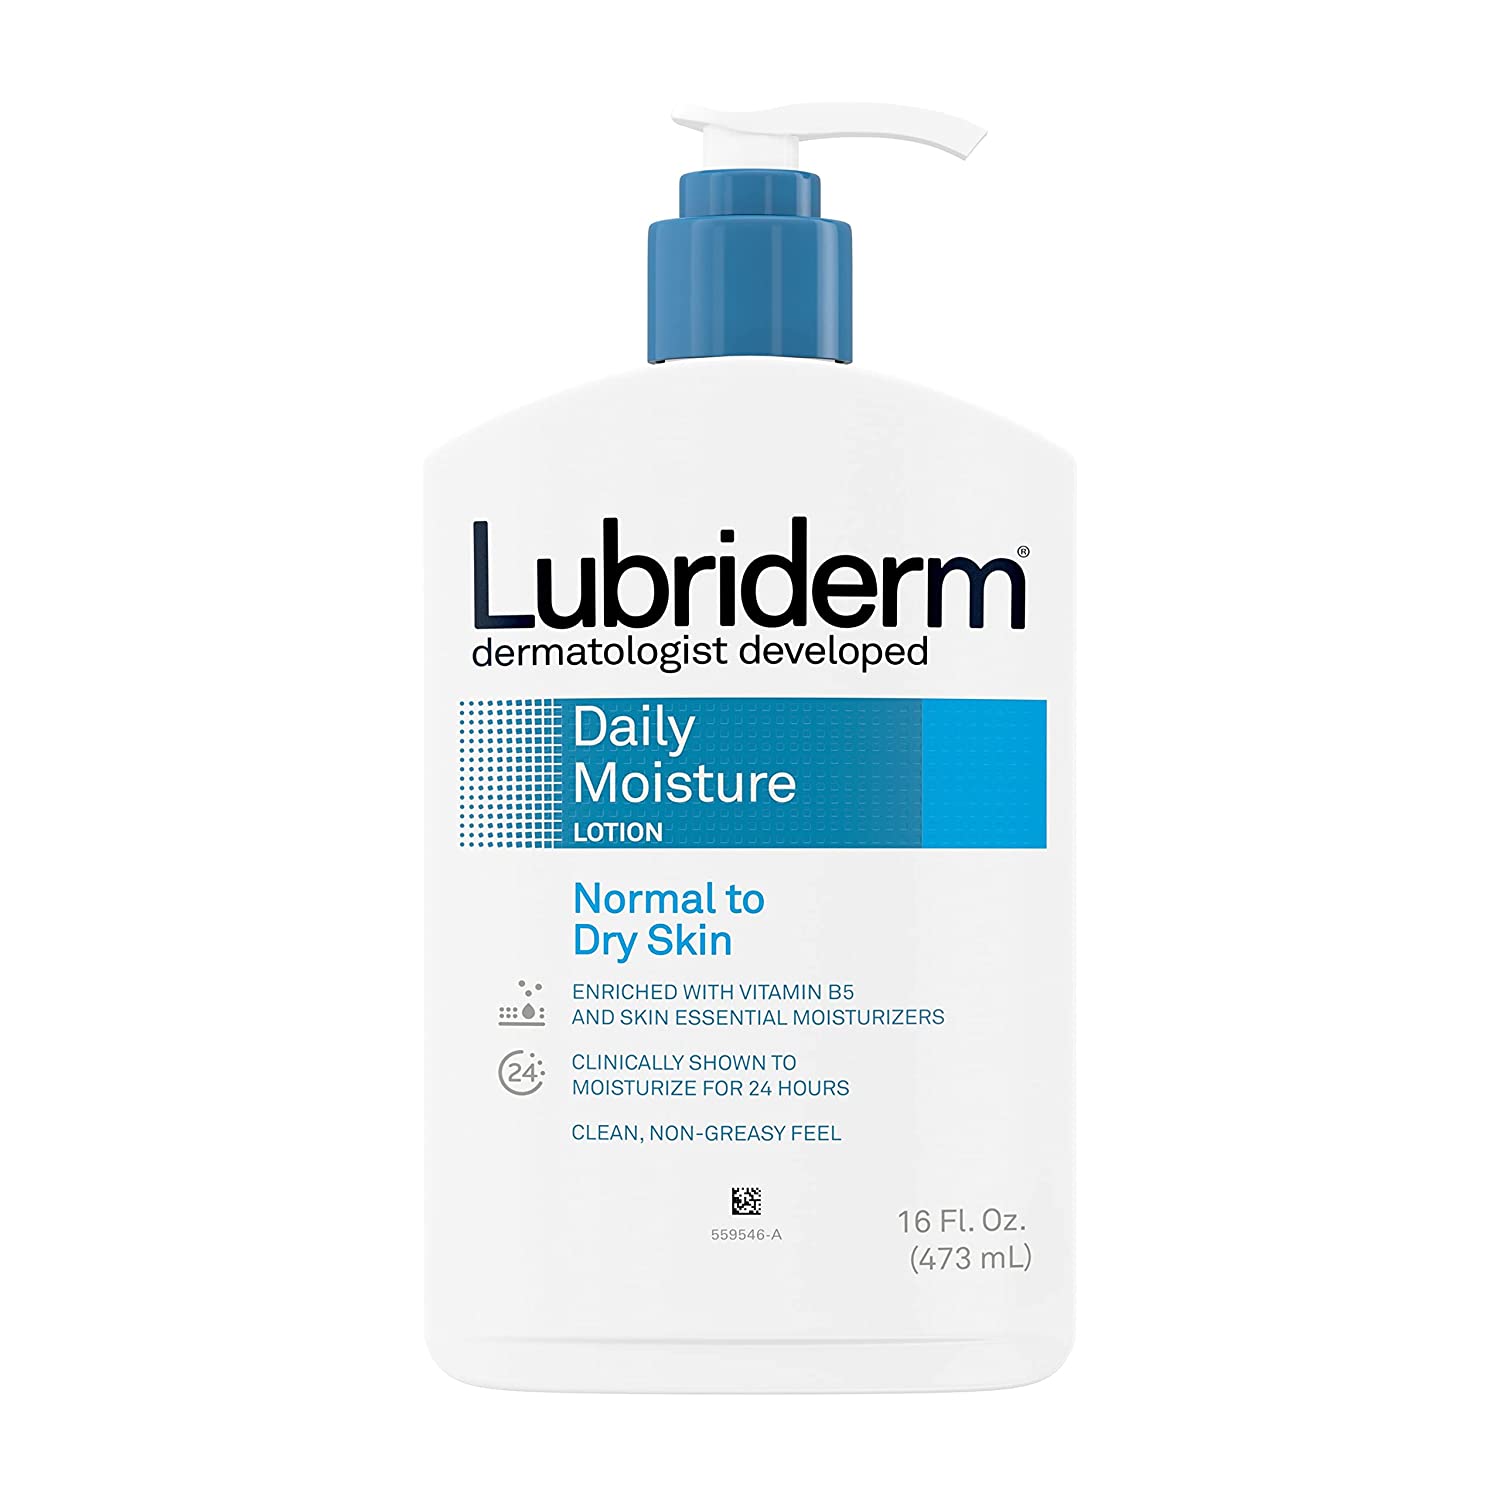 Lubriderm Daily Moisture Hydrating Body and Hand Lotion To Help Moisturize Dry Skin with Pro Vitamin B5